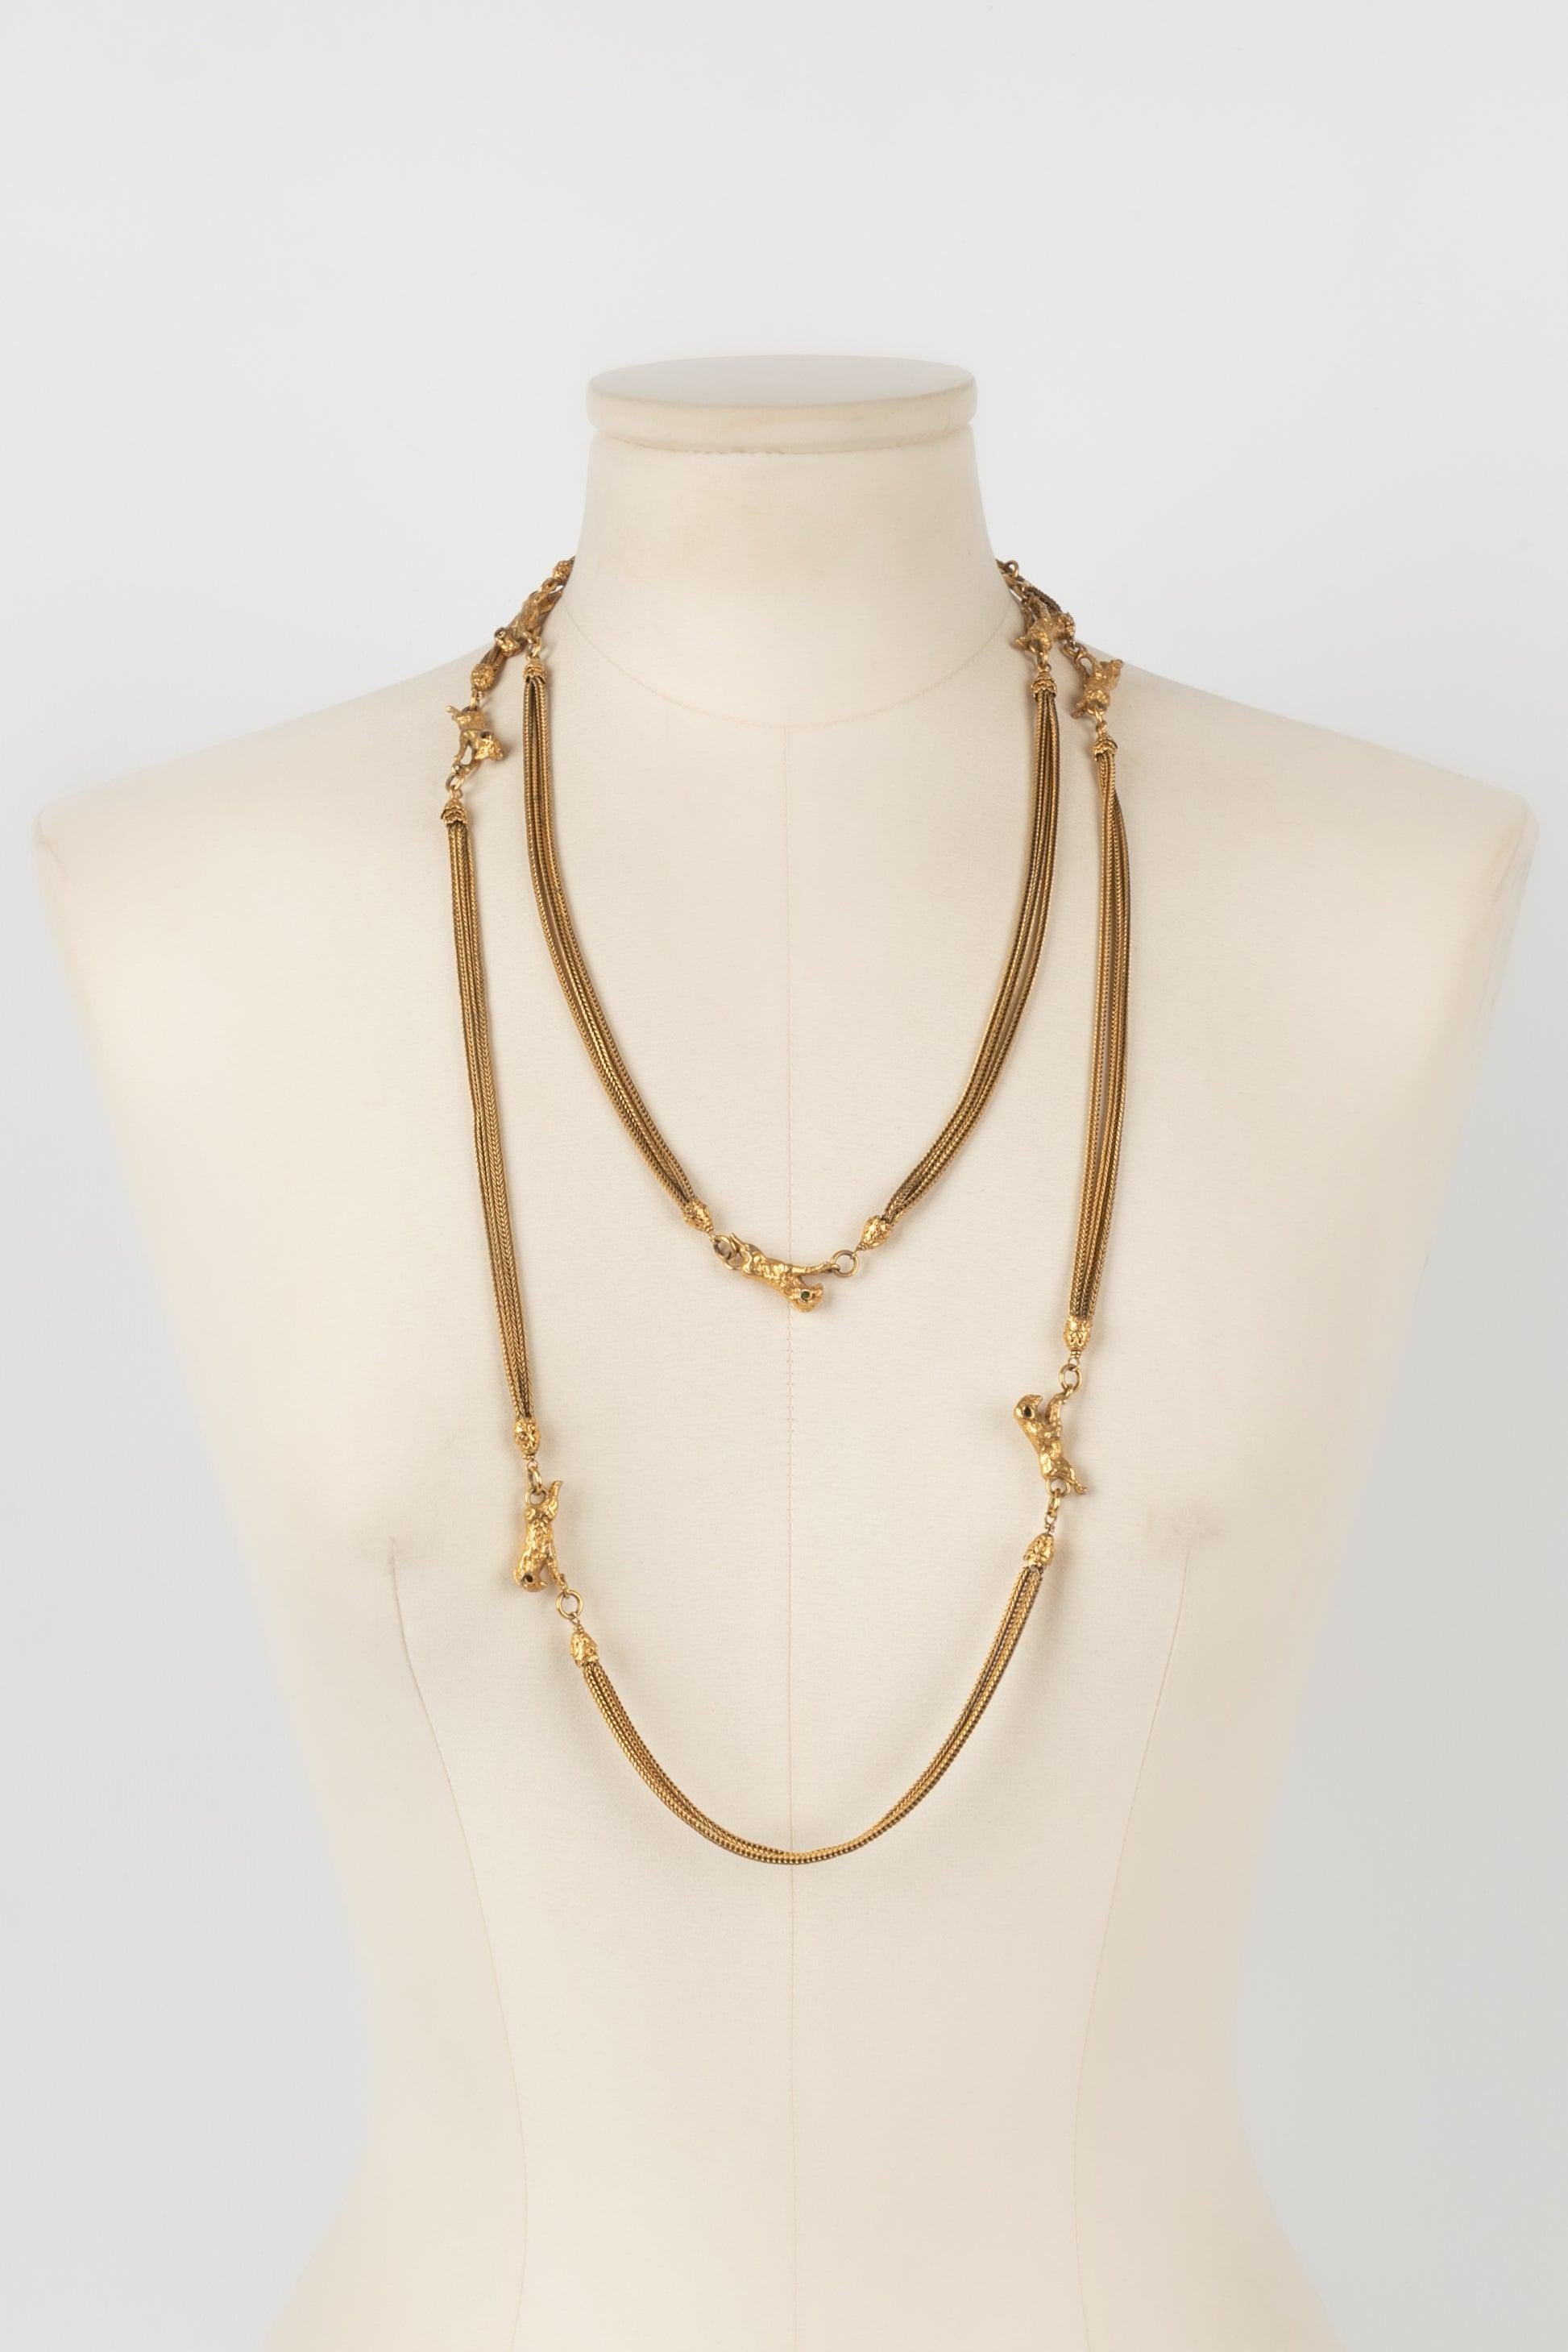 Chanel - (Made in France)Golden metal long sautoir necklace made of chains and ram heads. Antique jewelry from the 1970s.

Additional information:
Condition: Very good condition
Dimensions: Length: 140 cm
Period: 20th Century

Seller Reference: CB23
